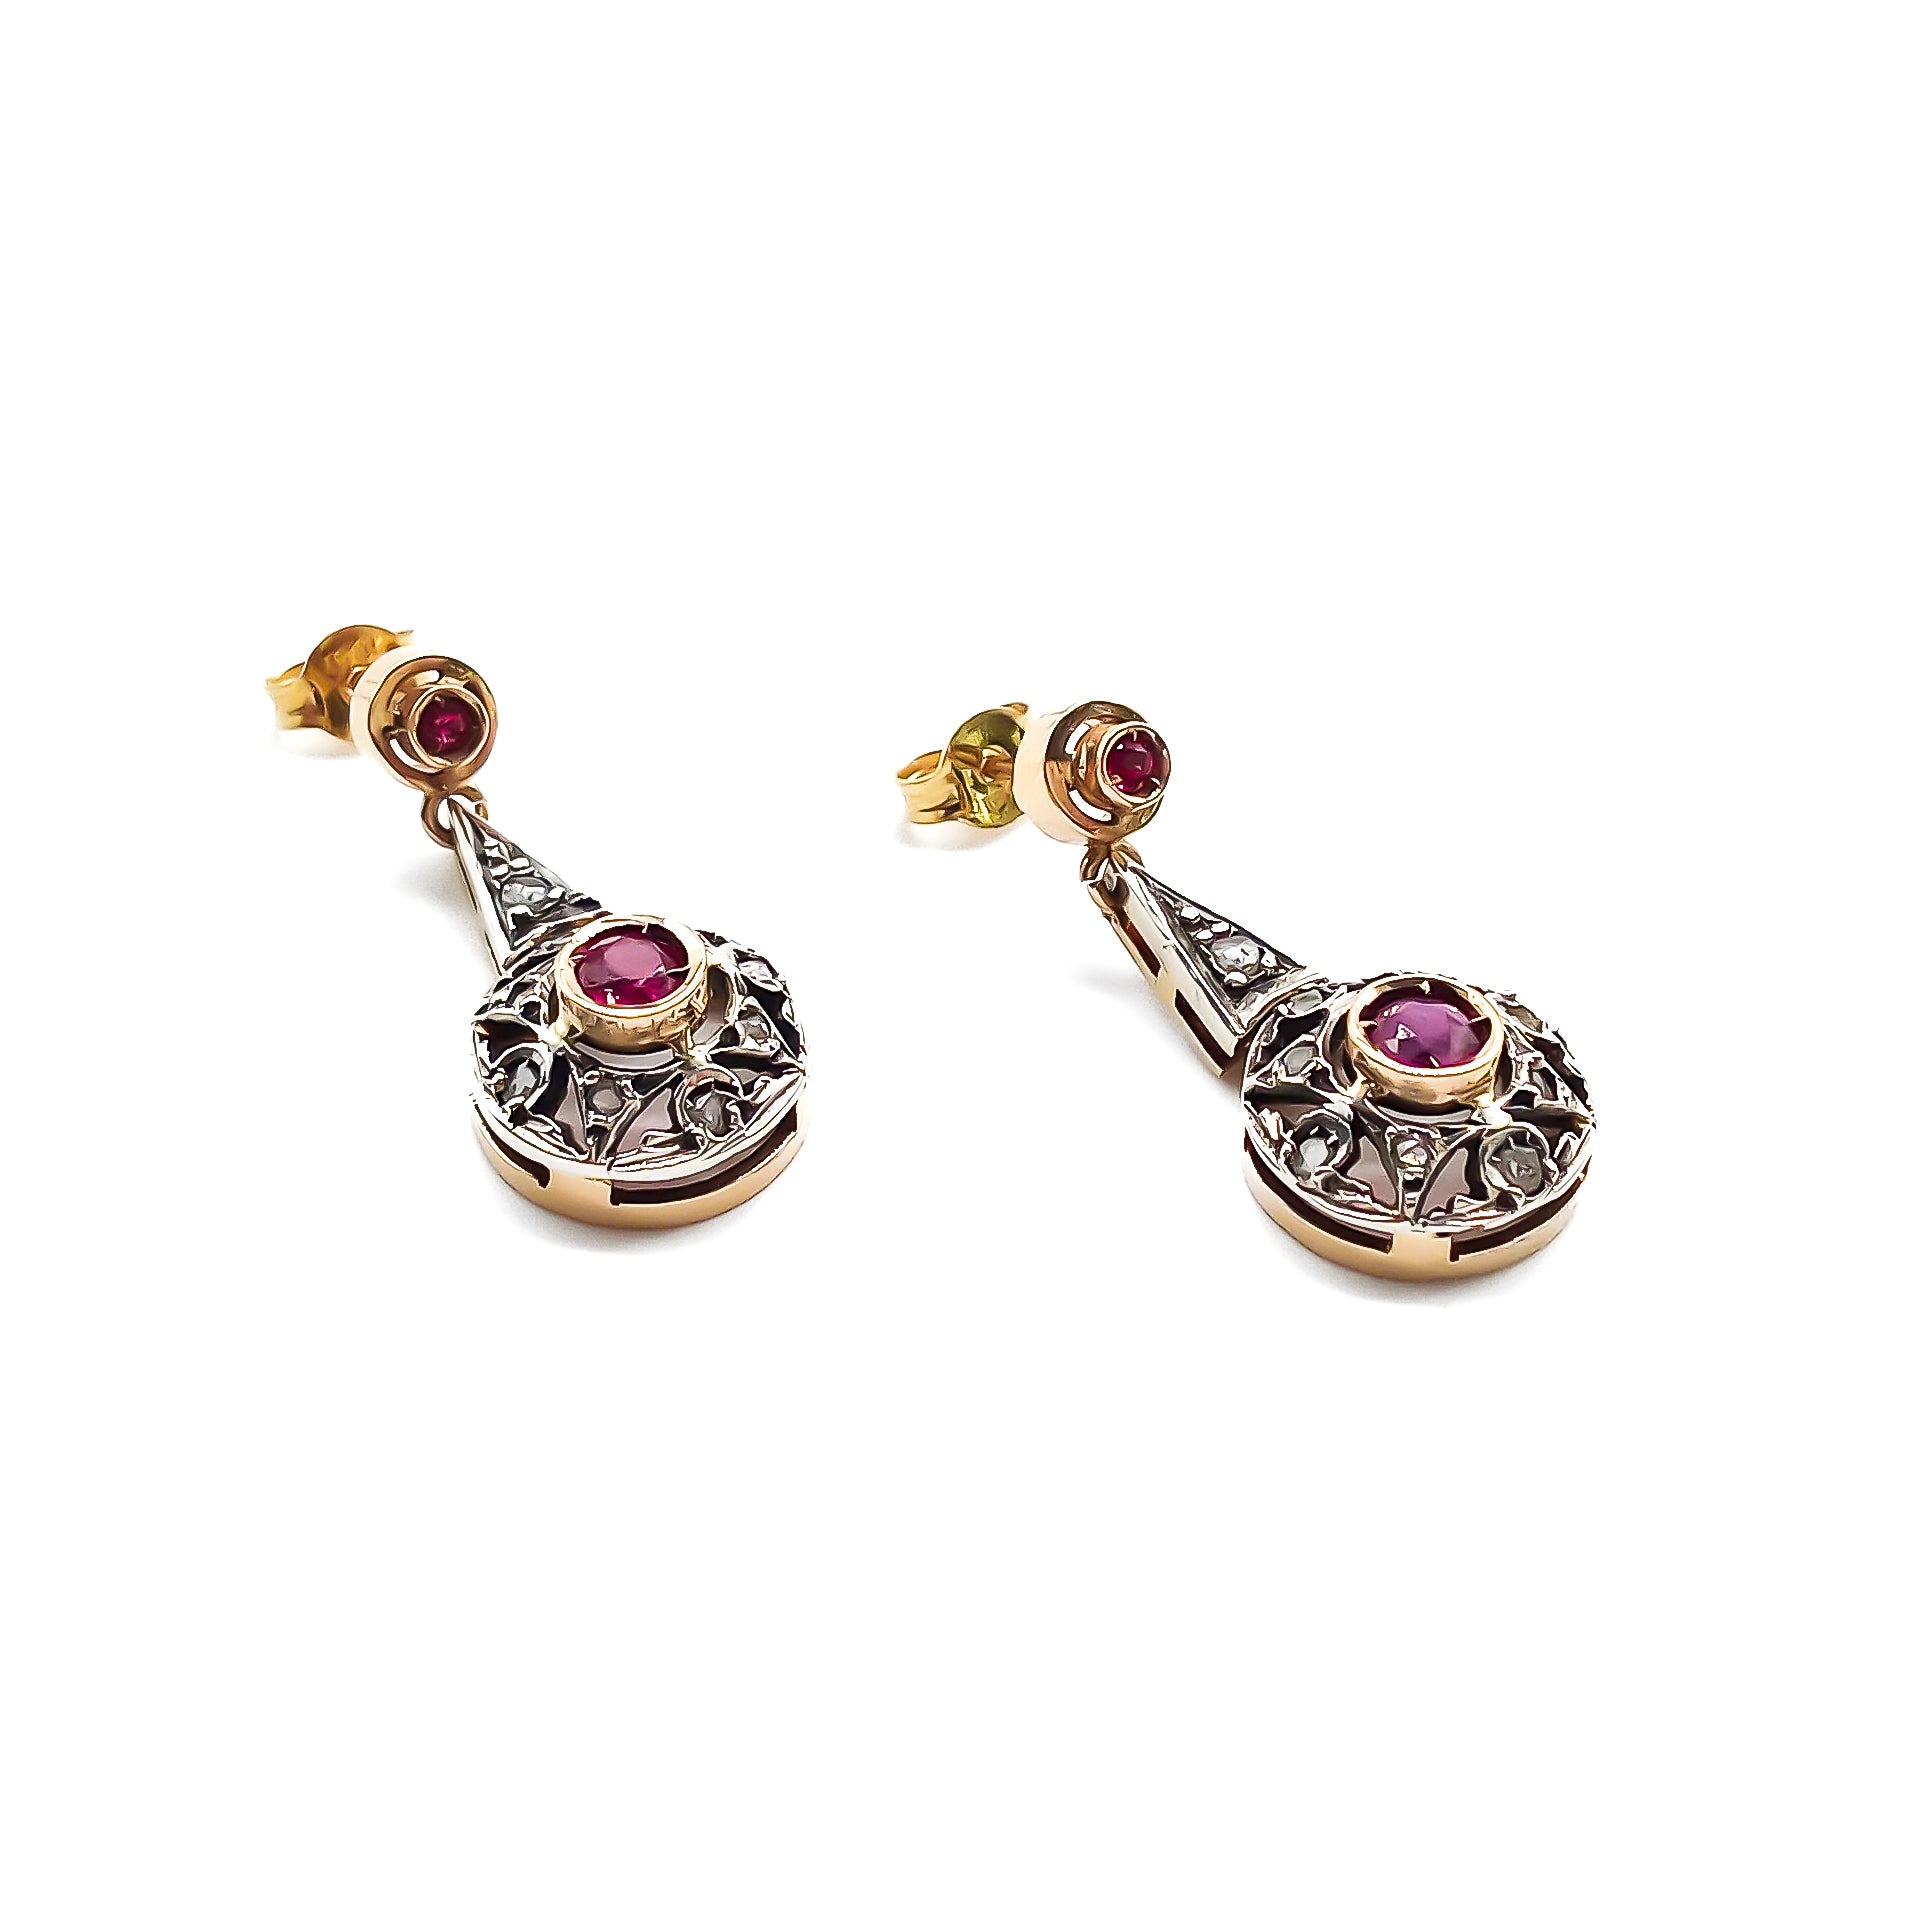 Gorgeous 18ct Gold and Silver earrings, each set with two faceted rubies and diamond chips. Italy